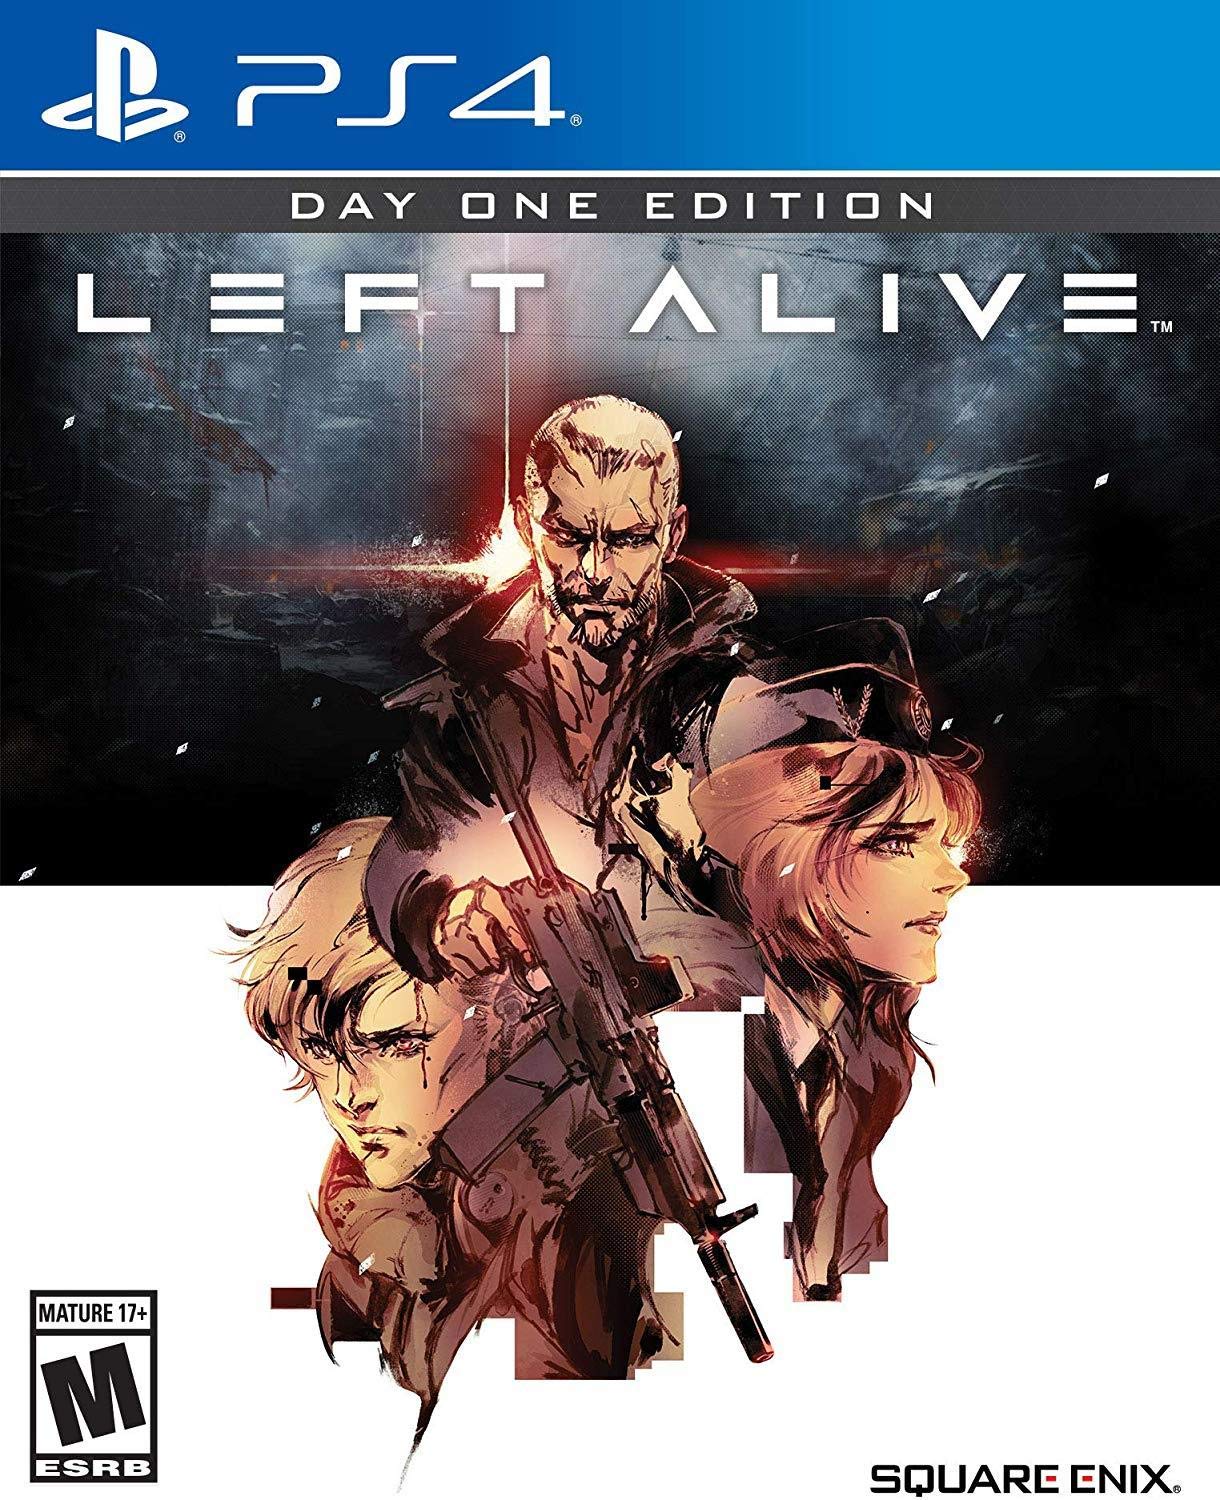 Left Alive - Day one edition